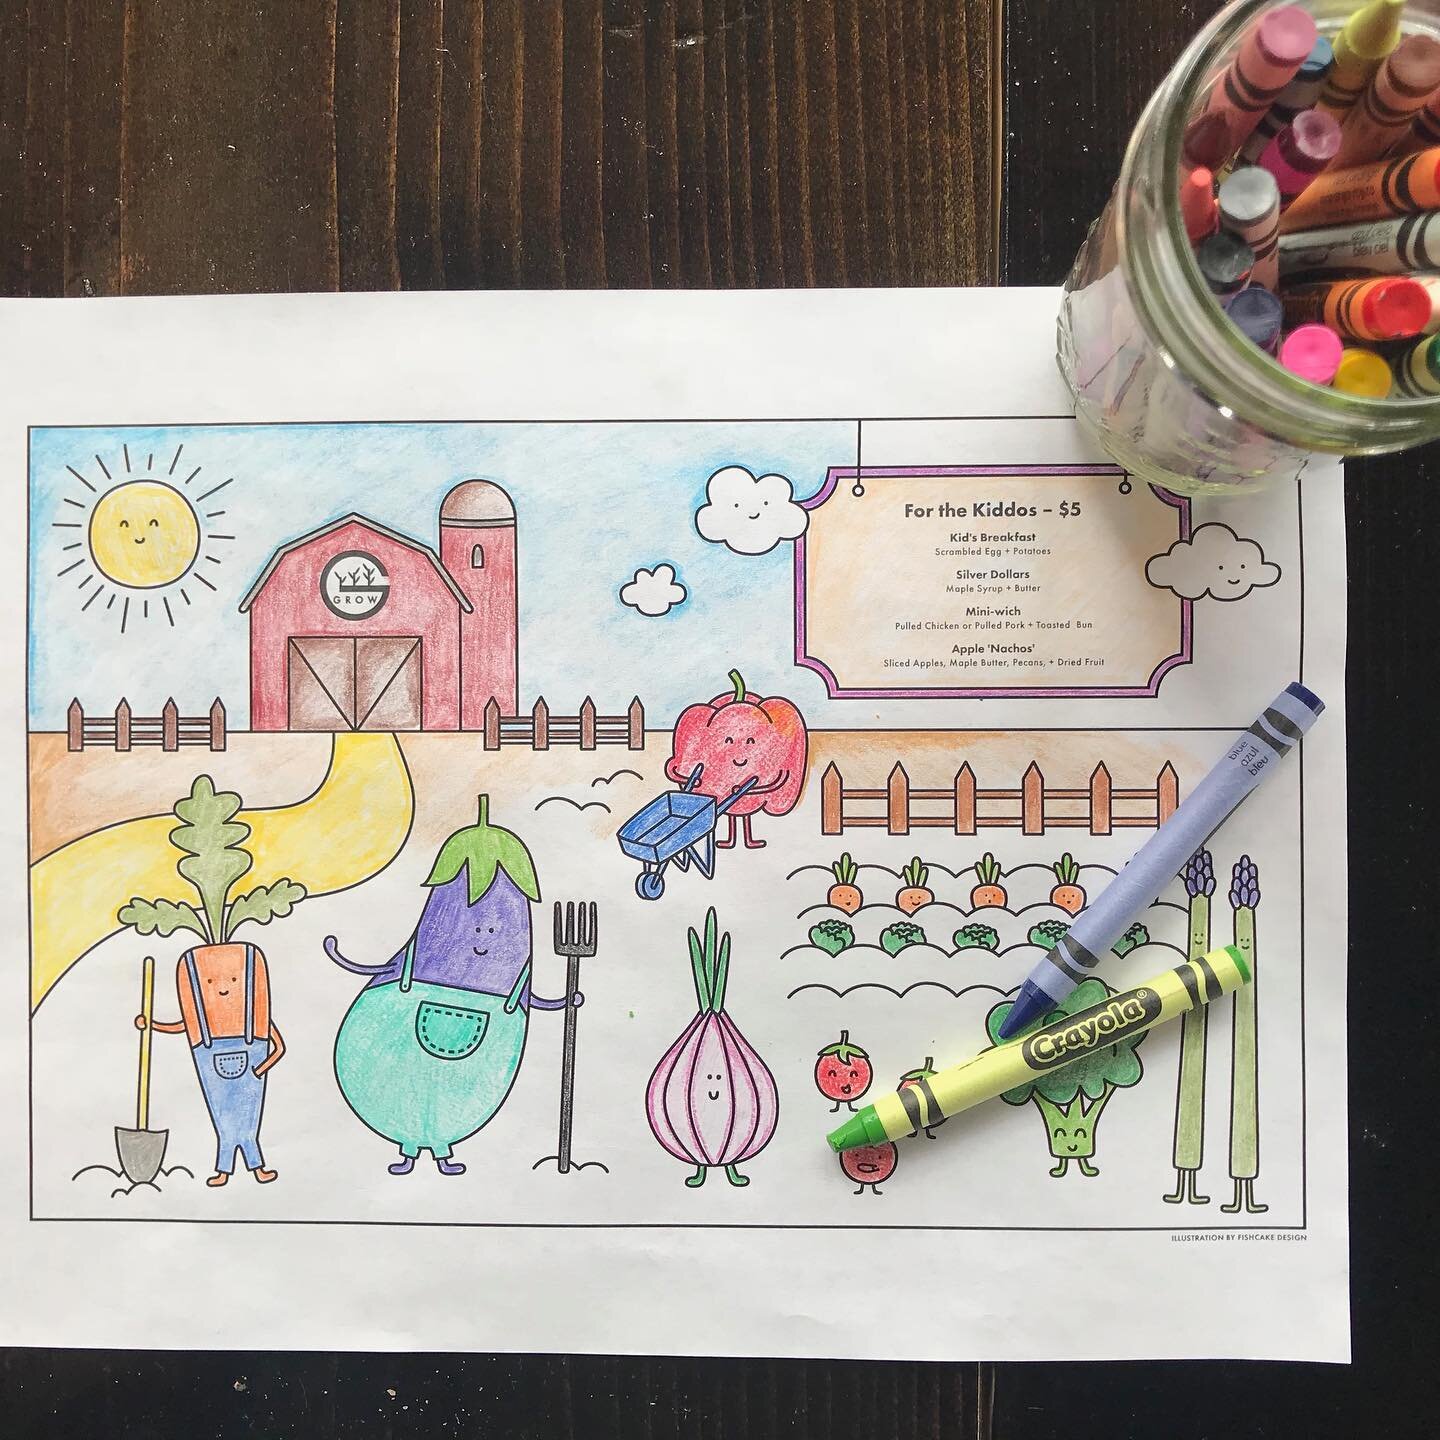 New blog post- We do our best to create a kid friendly dining experience!

A thank you to @tater__tats  @fishcakedesign for your kid friendly veggie artwork! 🥕 🥒